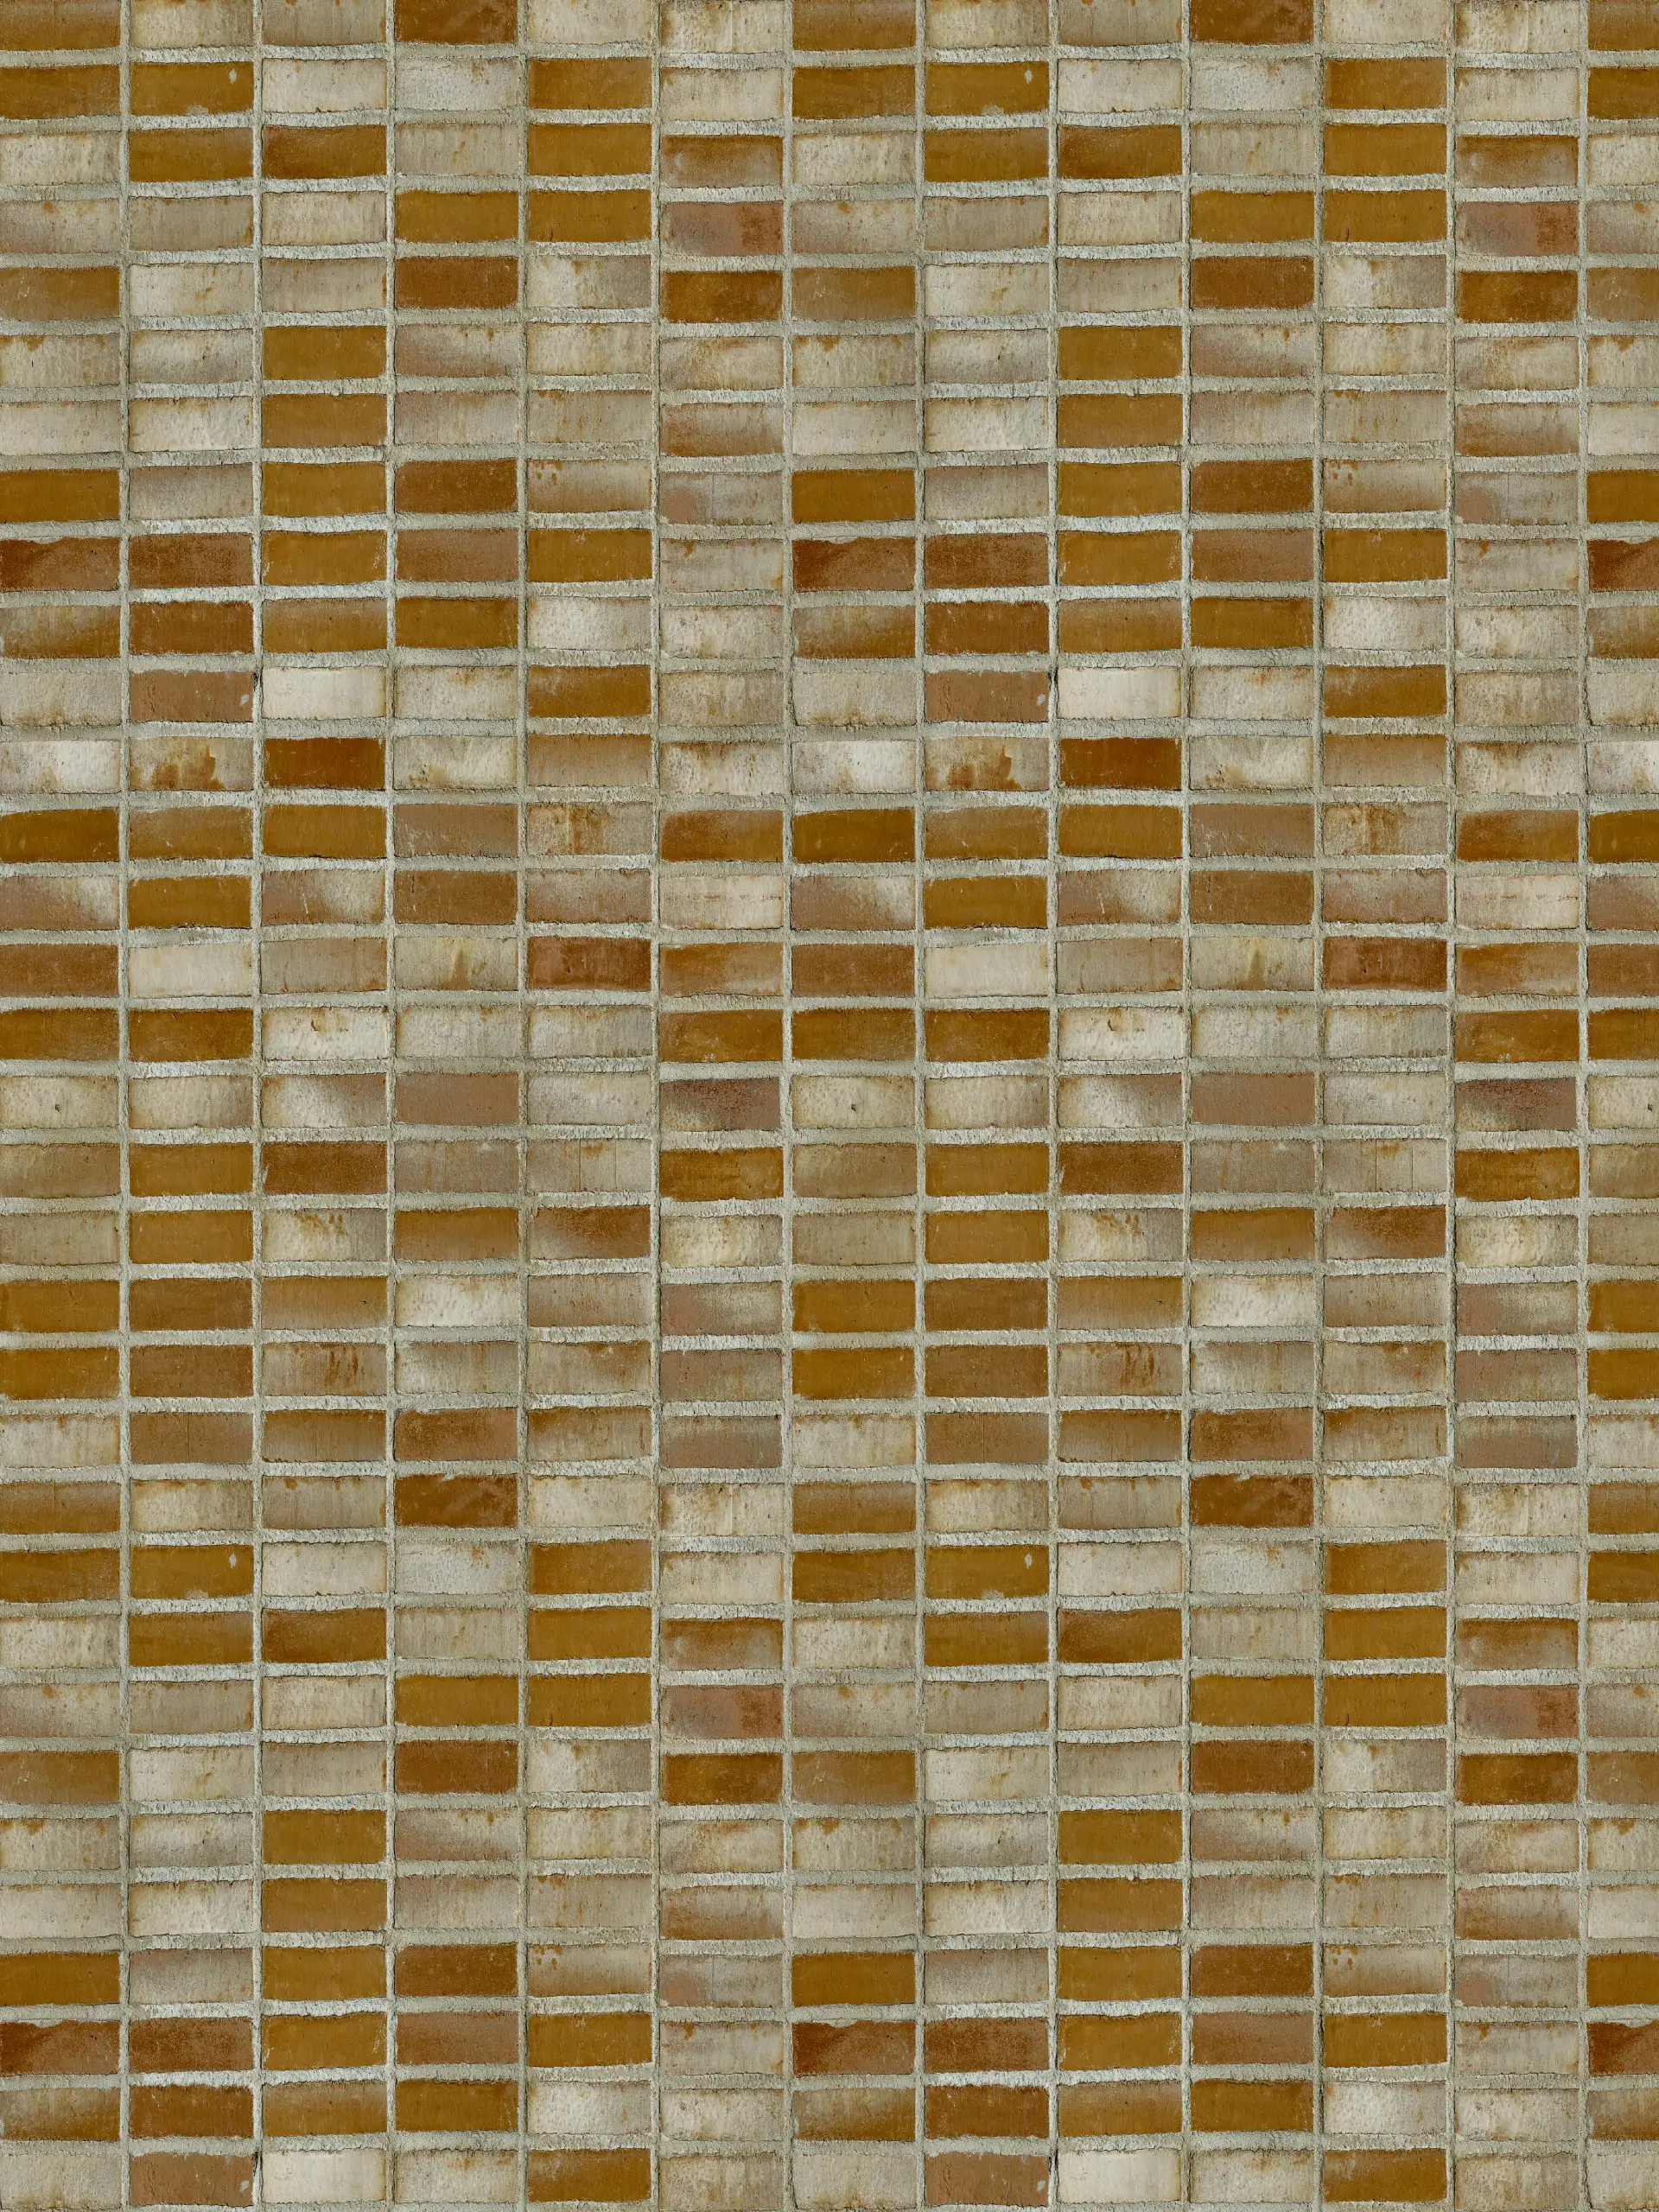 Tan Brick Flooring Wall Paper Printable for Doll House